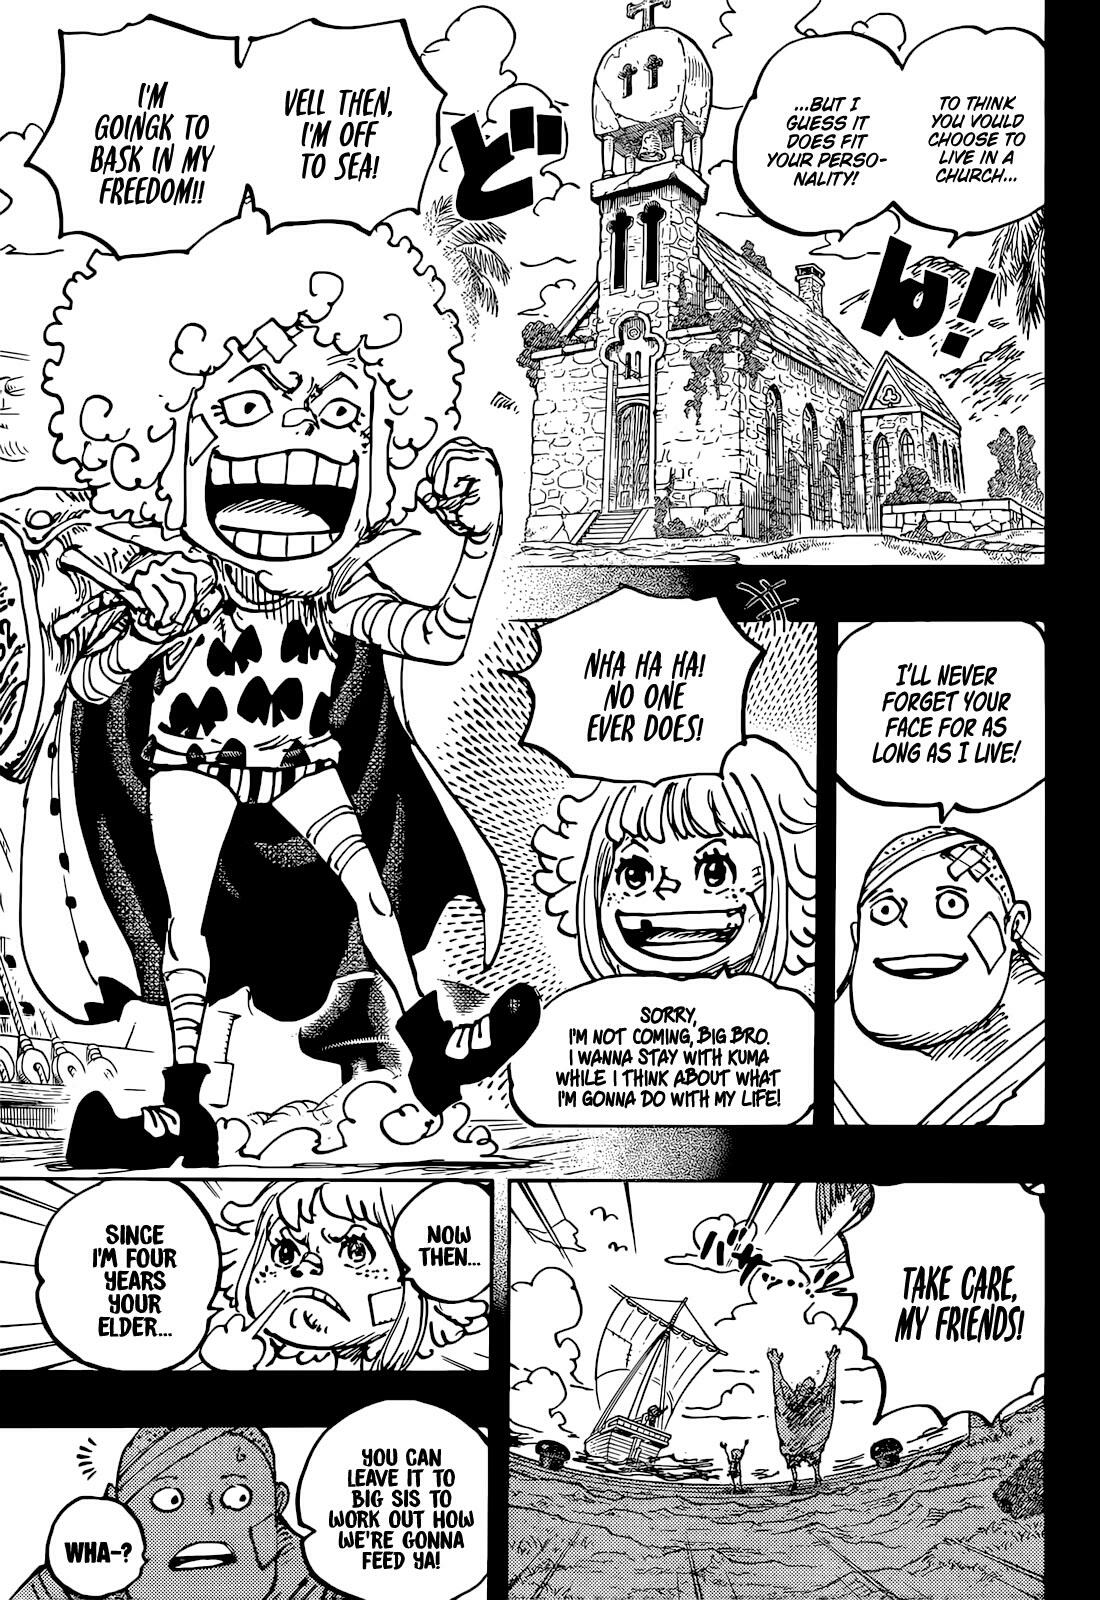 One Piece chapter 1015: Spoilers leak online for upcoming manga